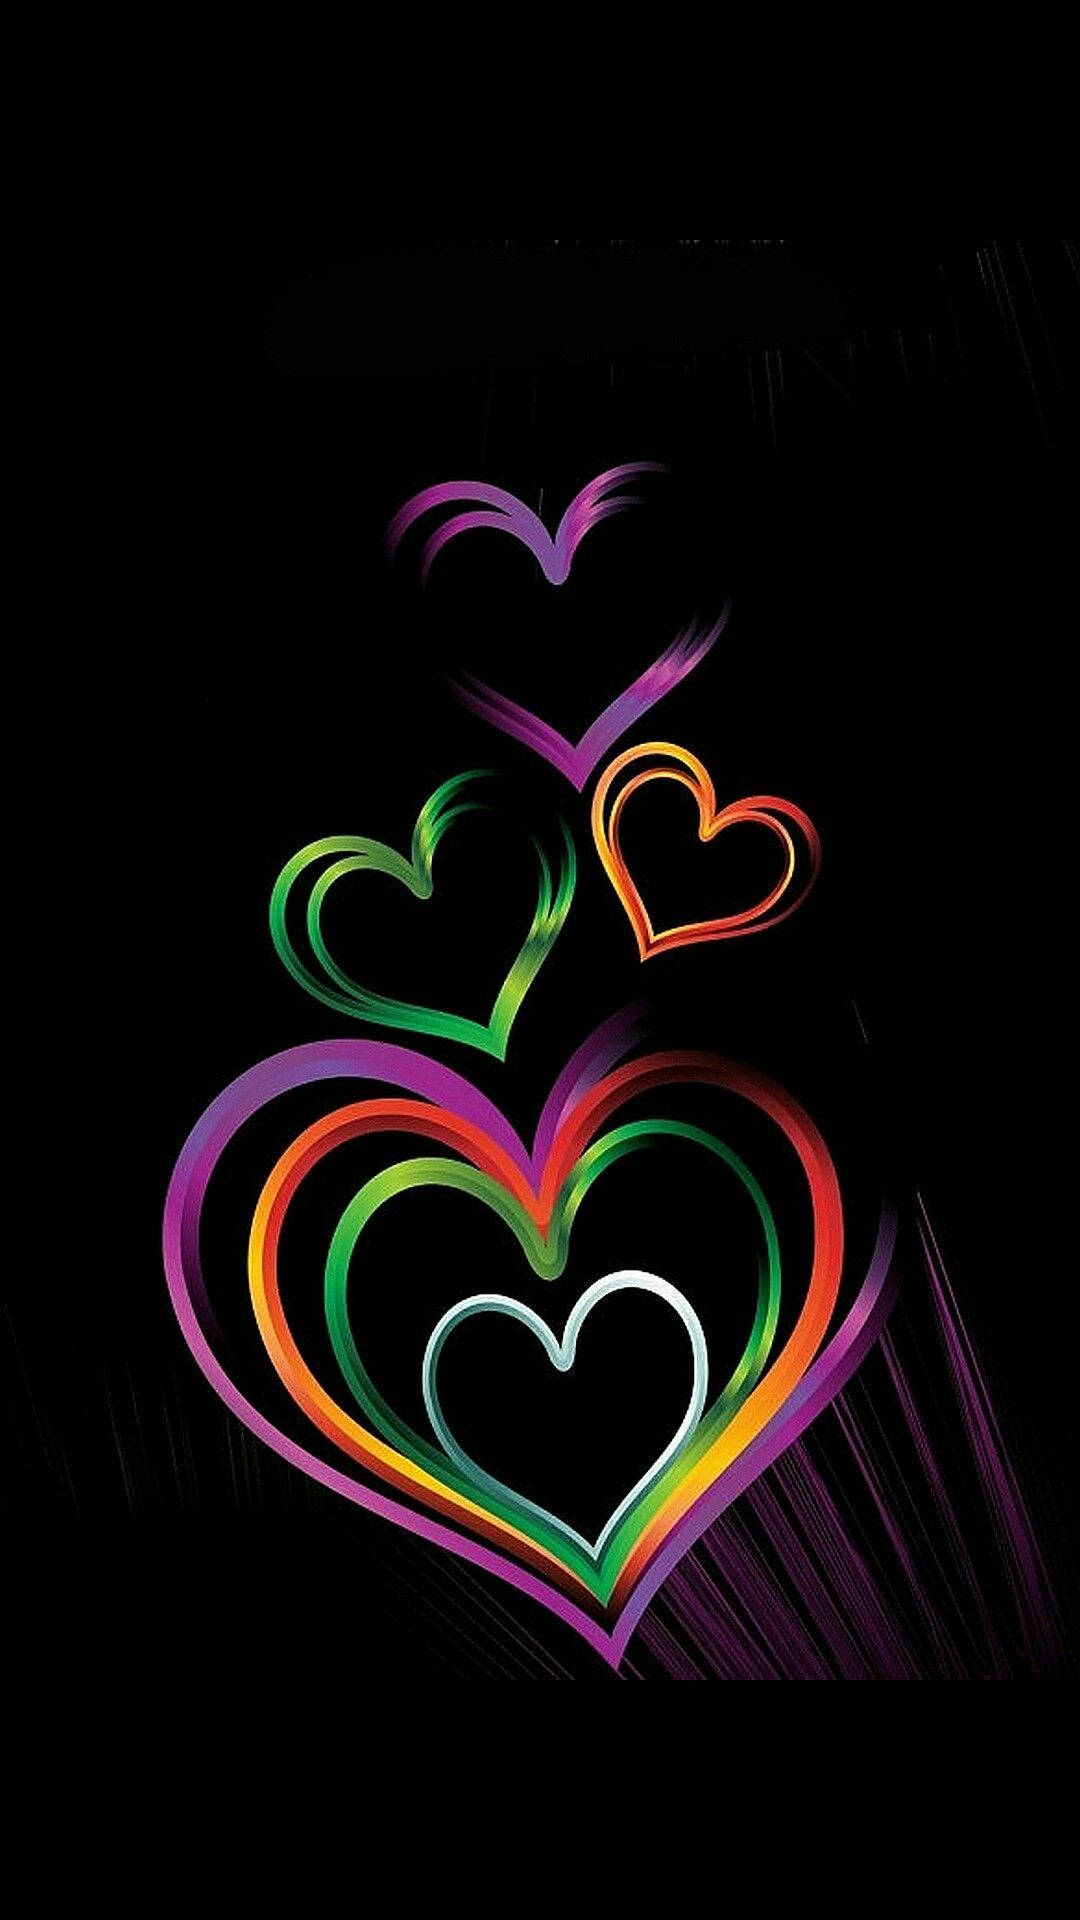 Captivating Heart Theme For Iphone Wallpaper